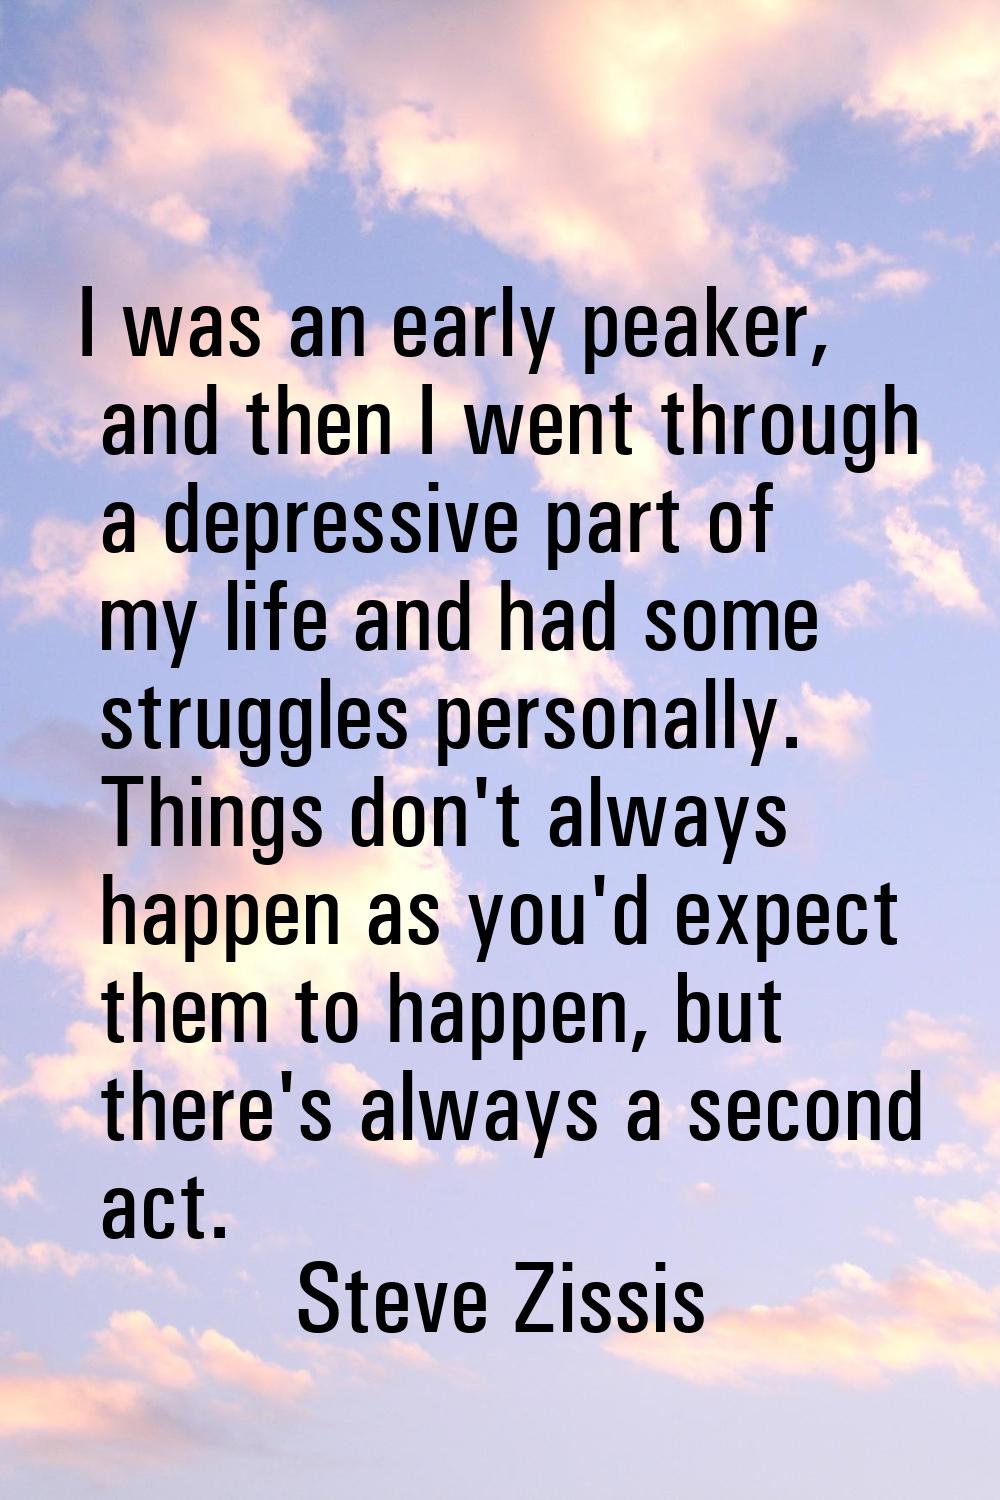 I was an early peaker, and then I went through a depressive part of my life and had some struggles 